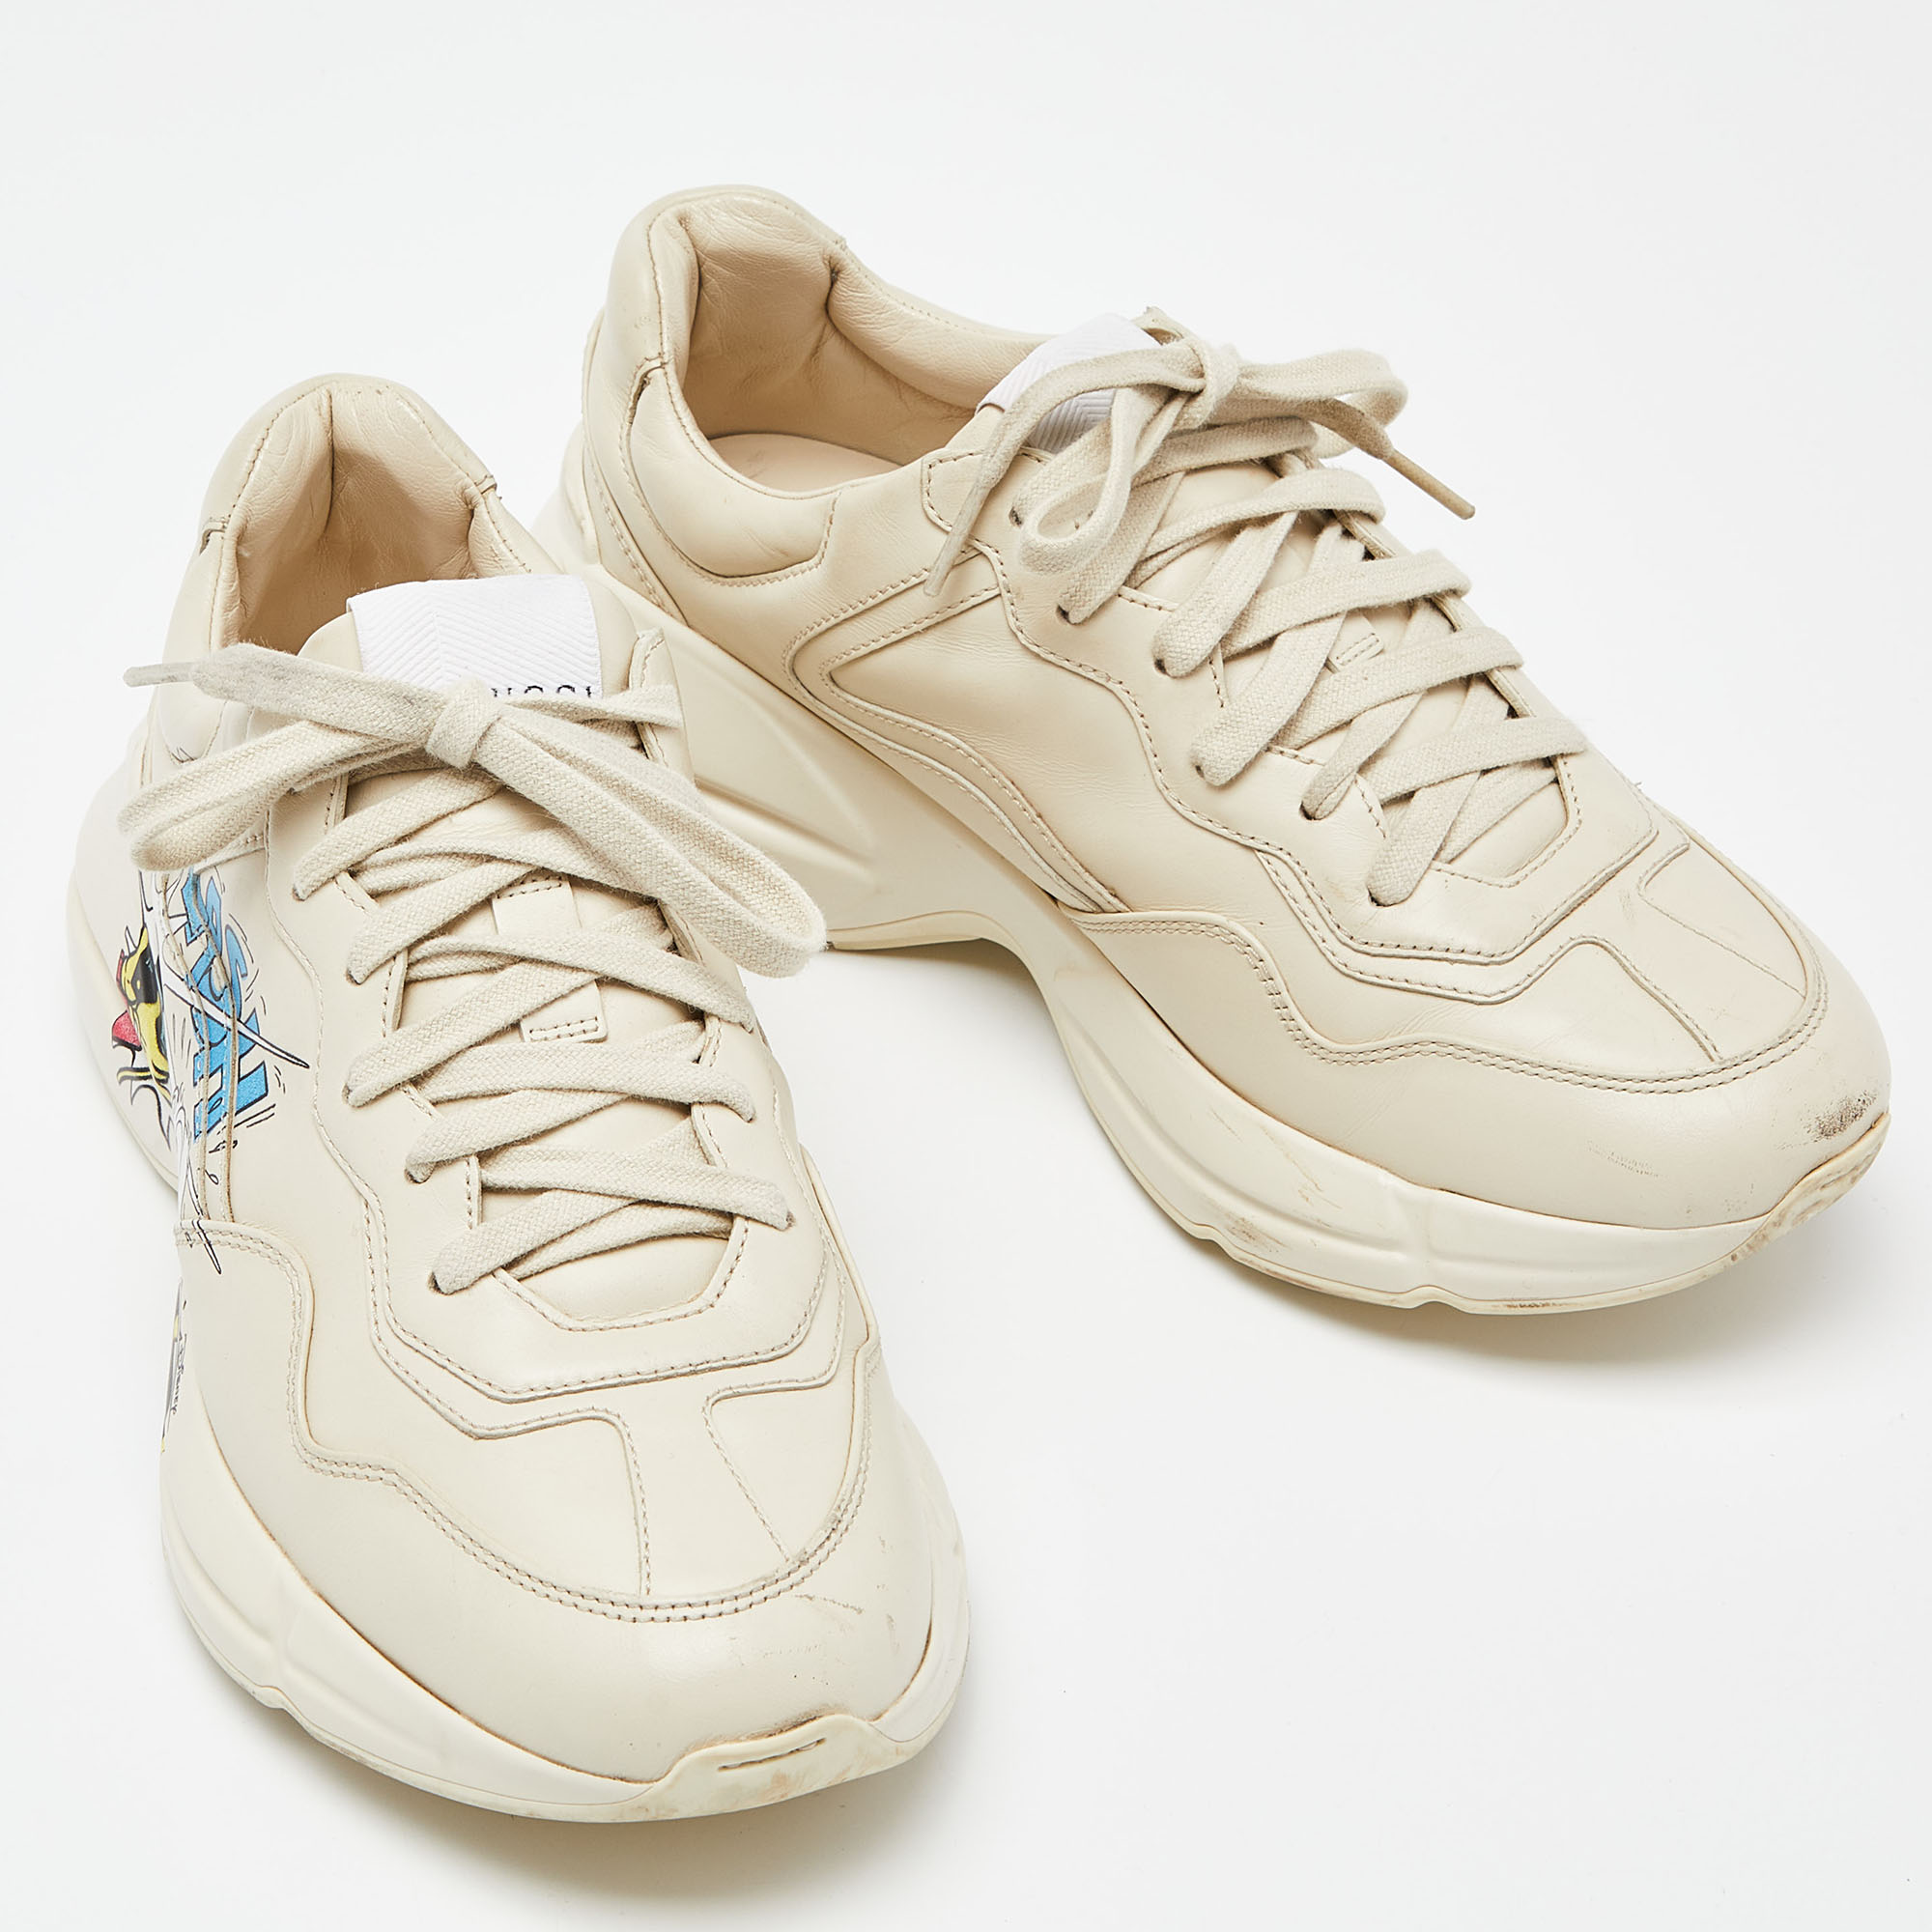 Gucci X Disney Donald Duck Cream Leather Rhyton Sneakers Size 38